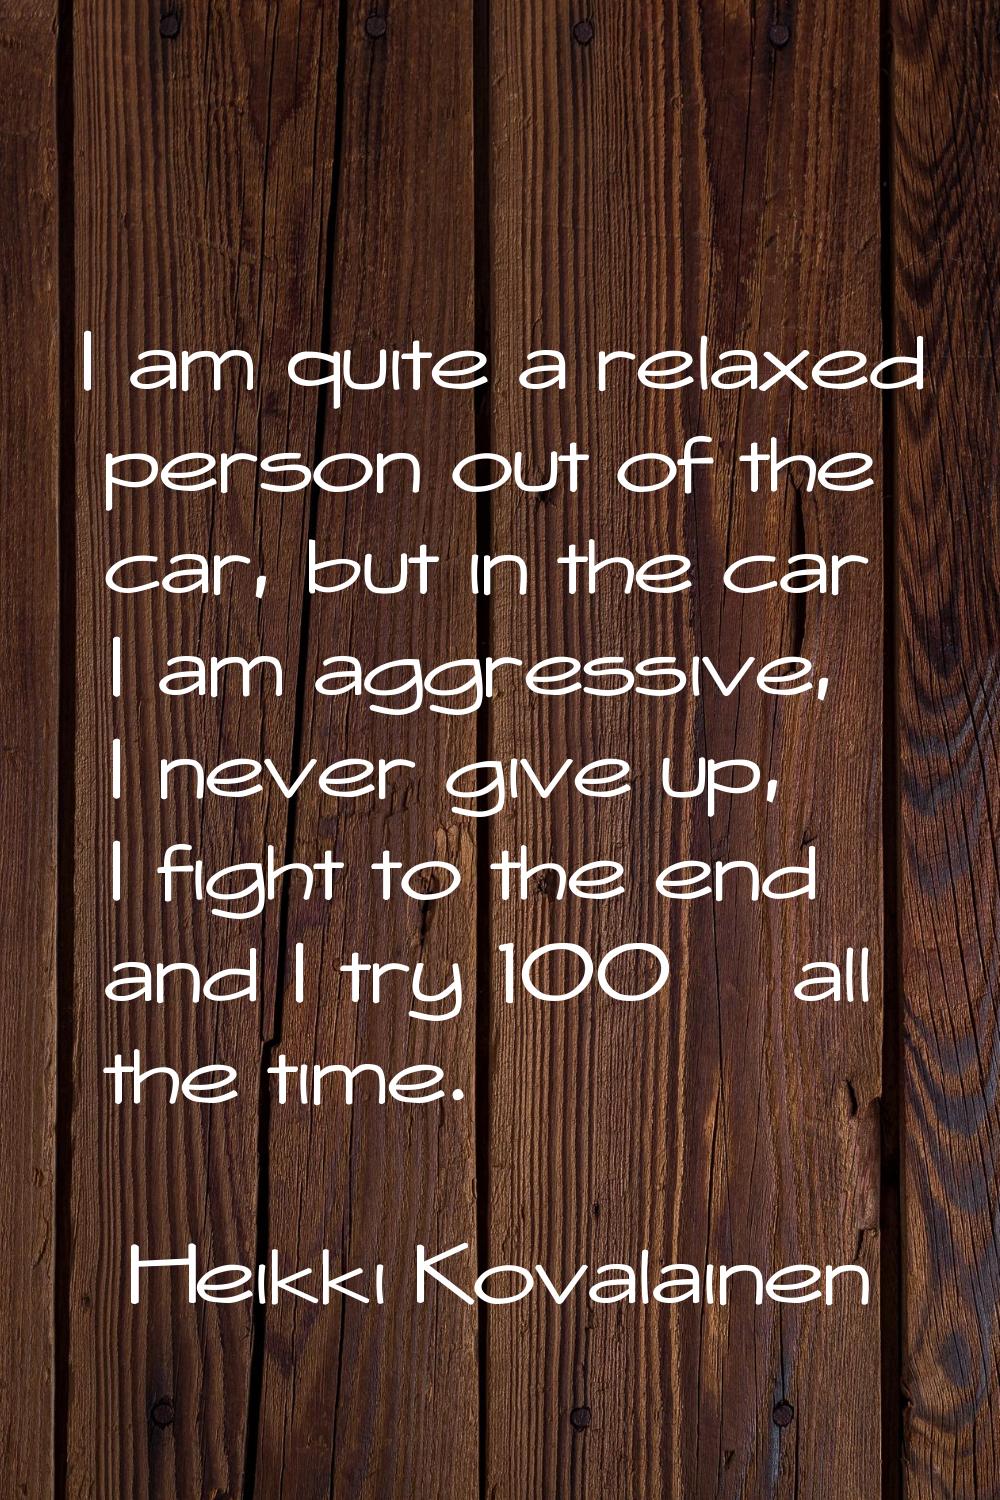 I am quite a relaxed person out of the car, but in the car I am aggressive, I never give up, I figh